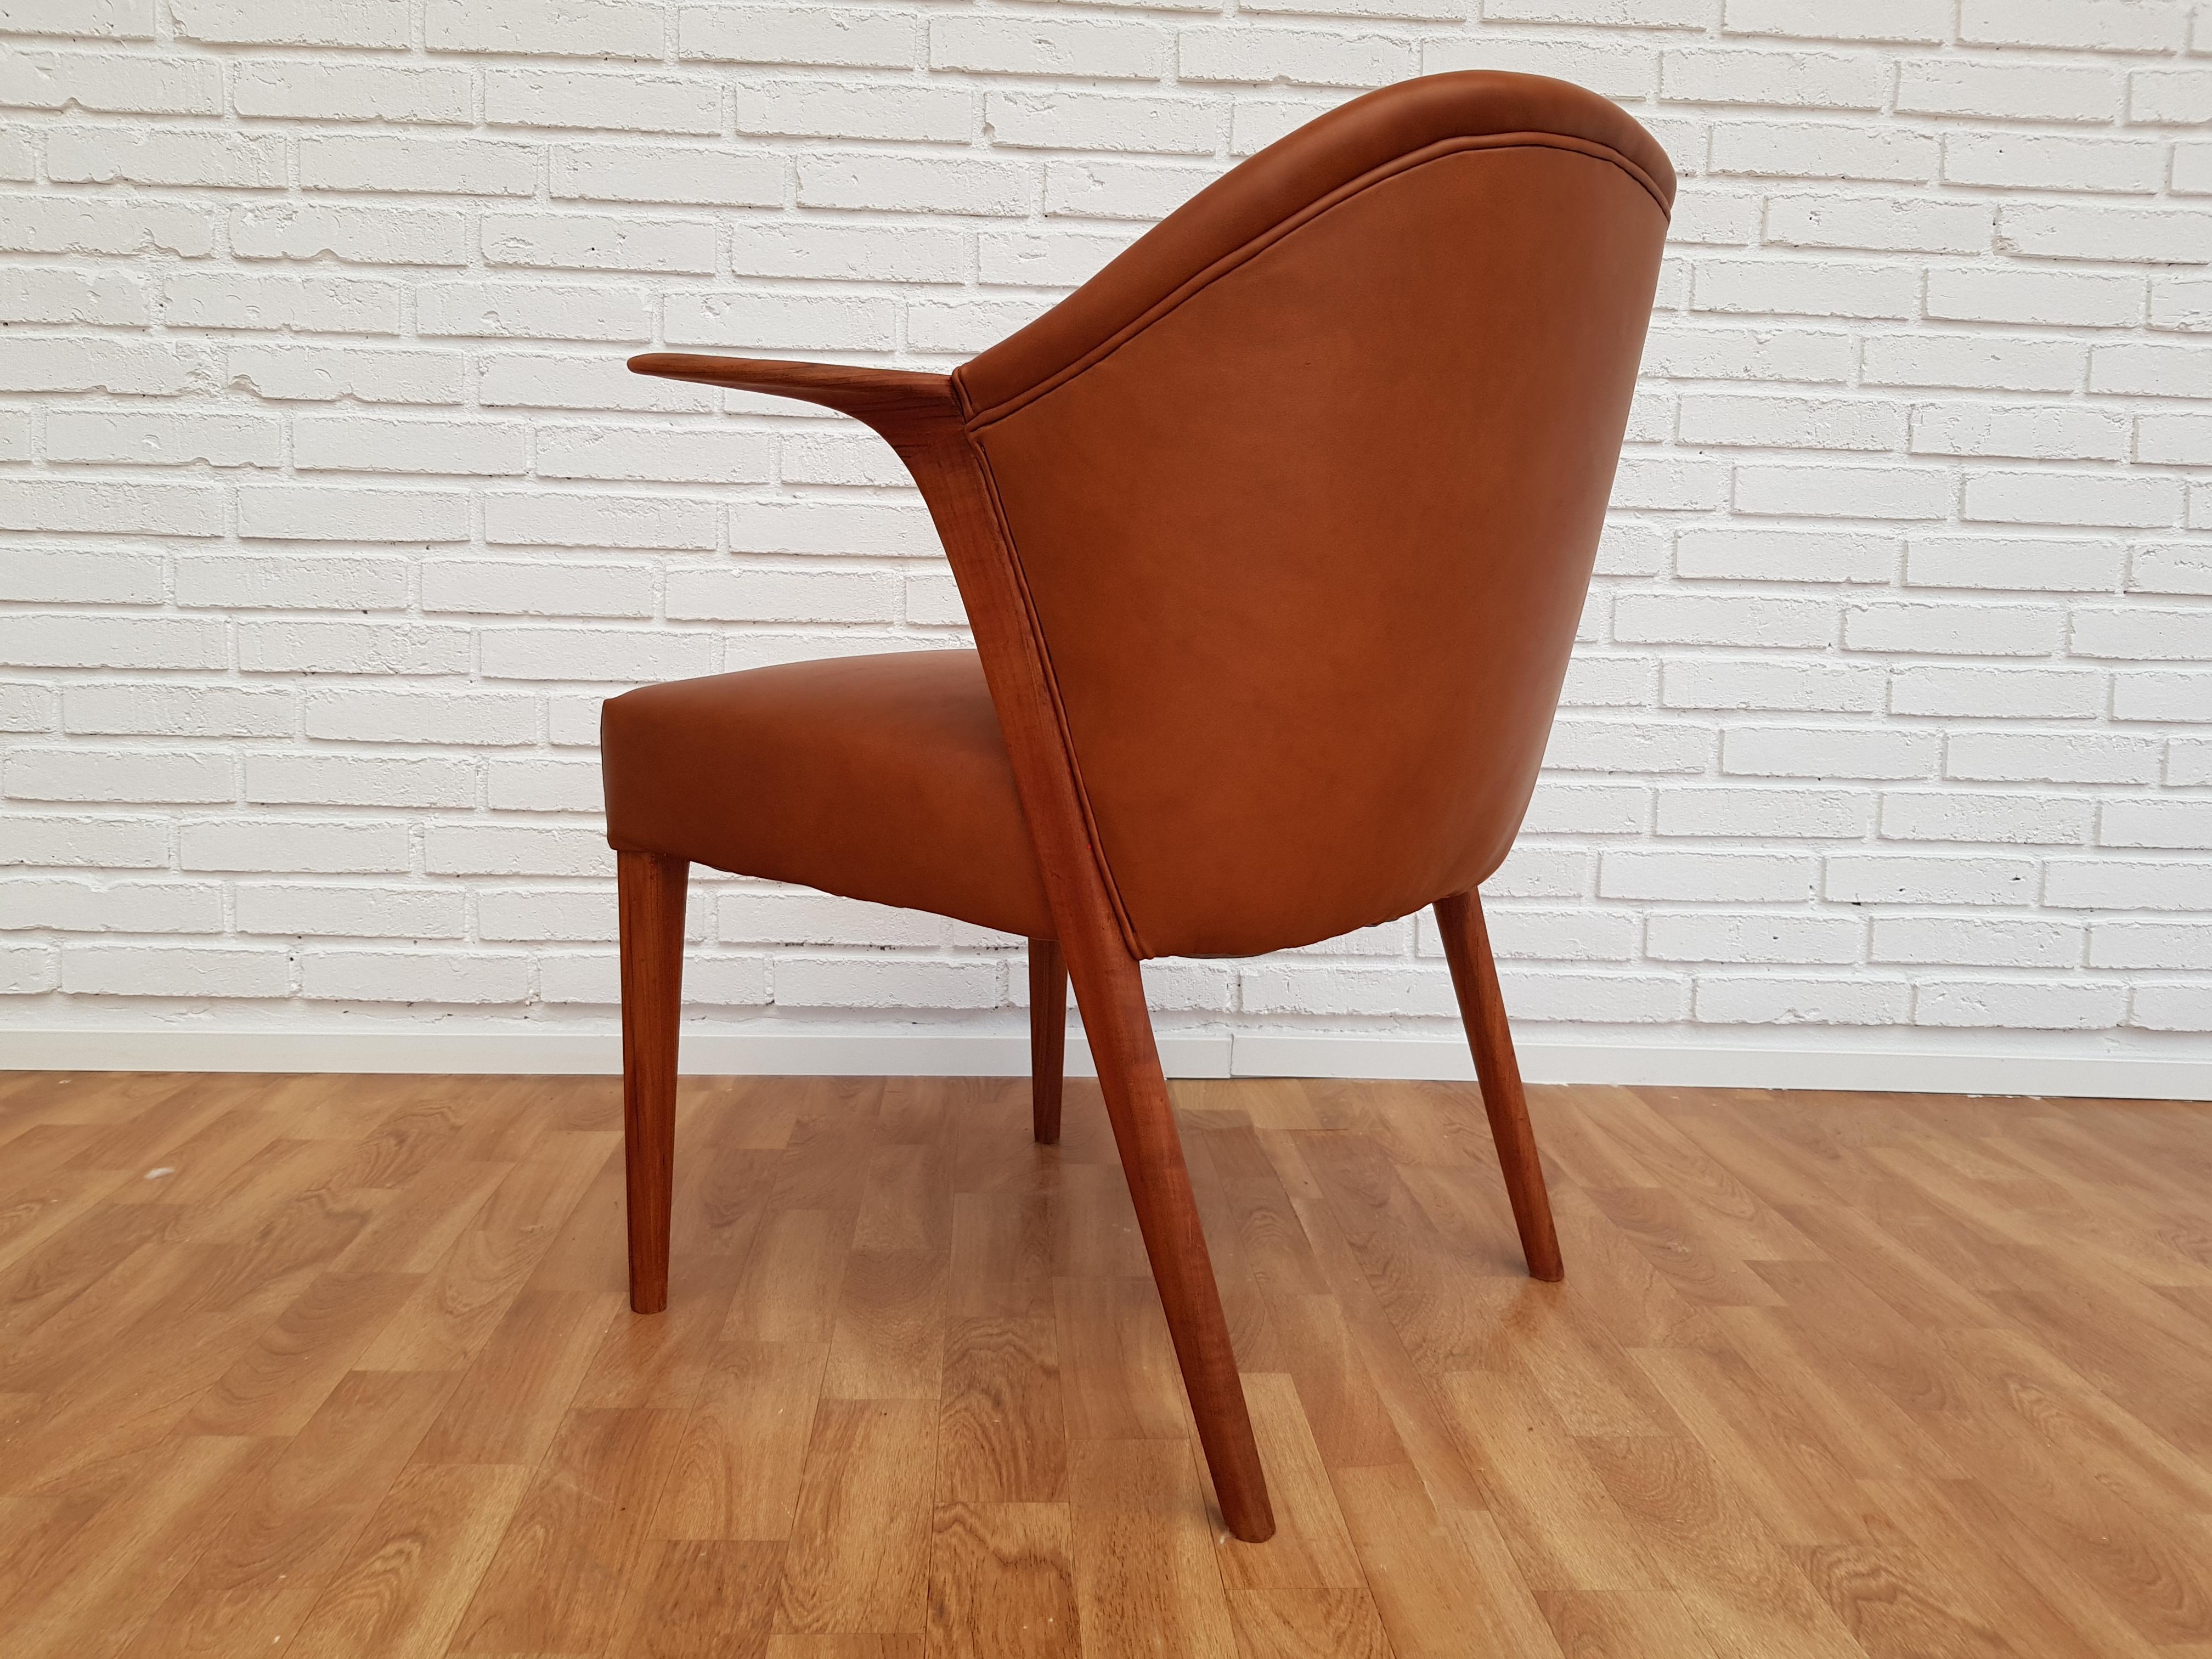 Mid-20th Century Danish Design by Kurt Olsen, Armchair 1960s, Leather, Completely Restored For Sale